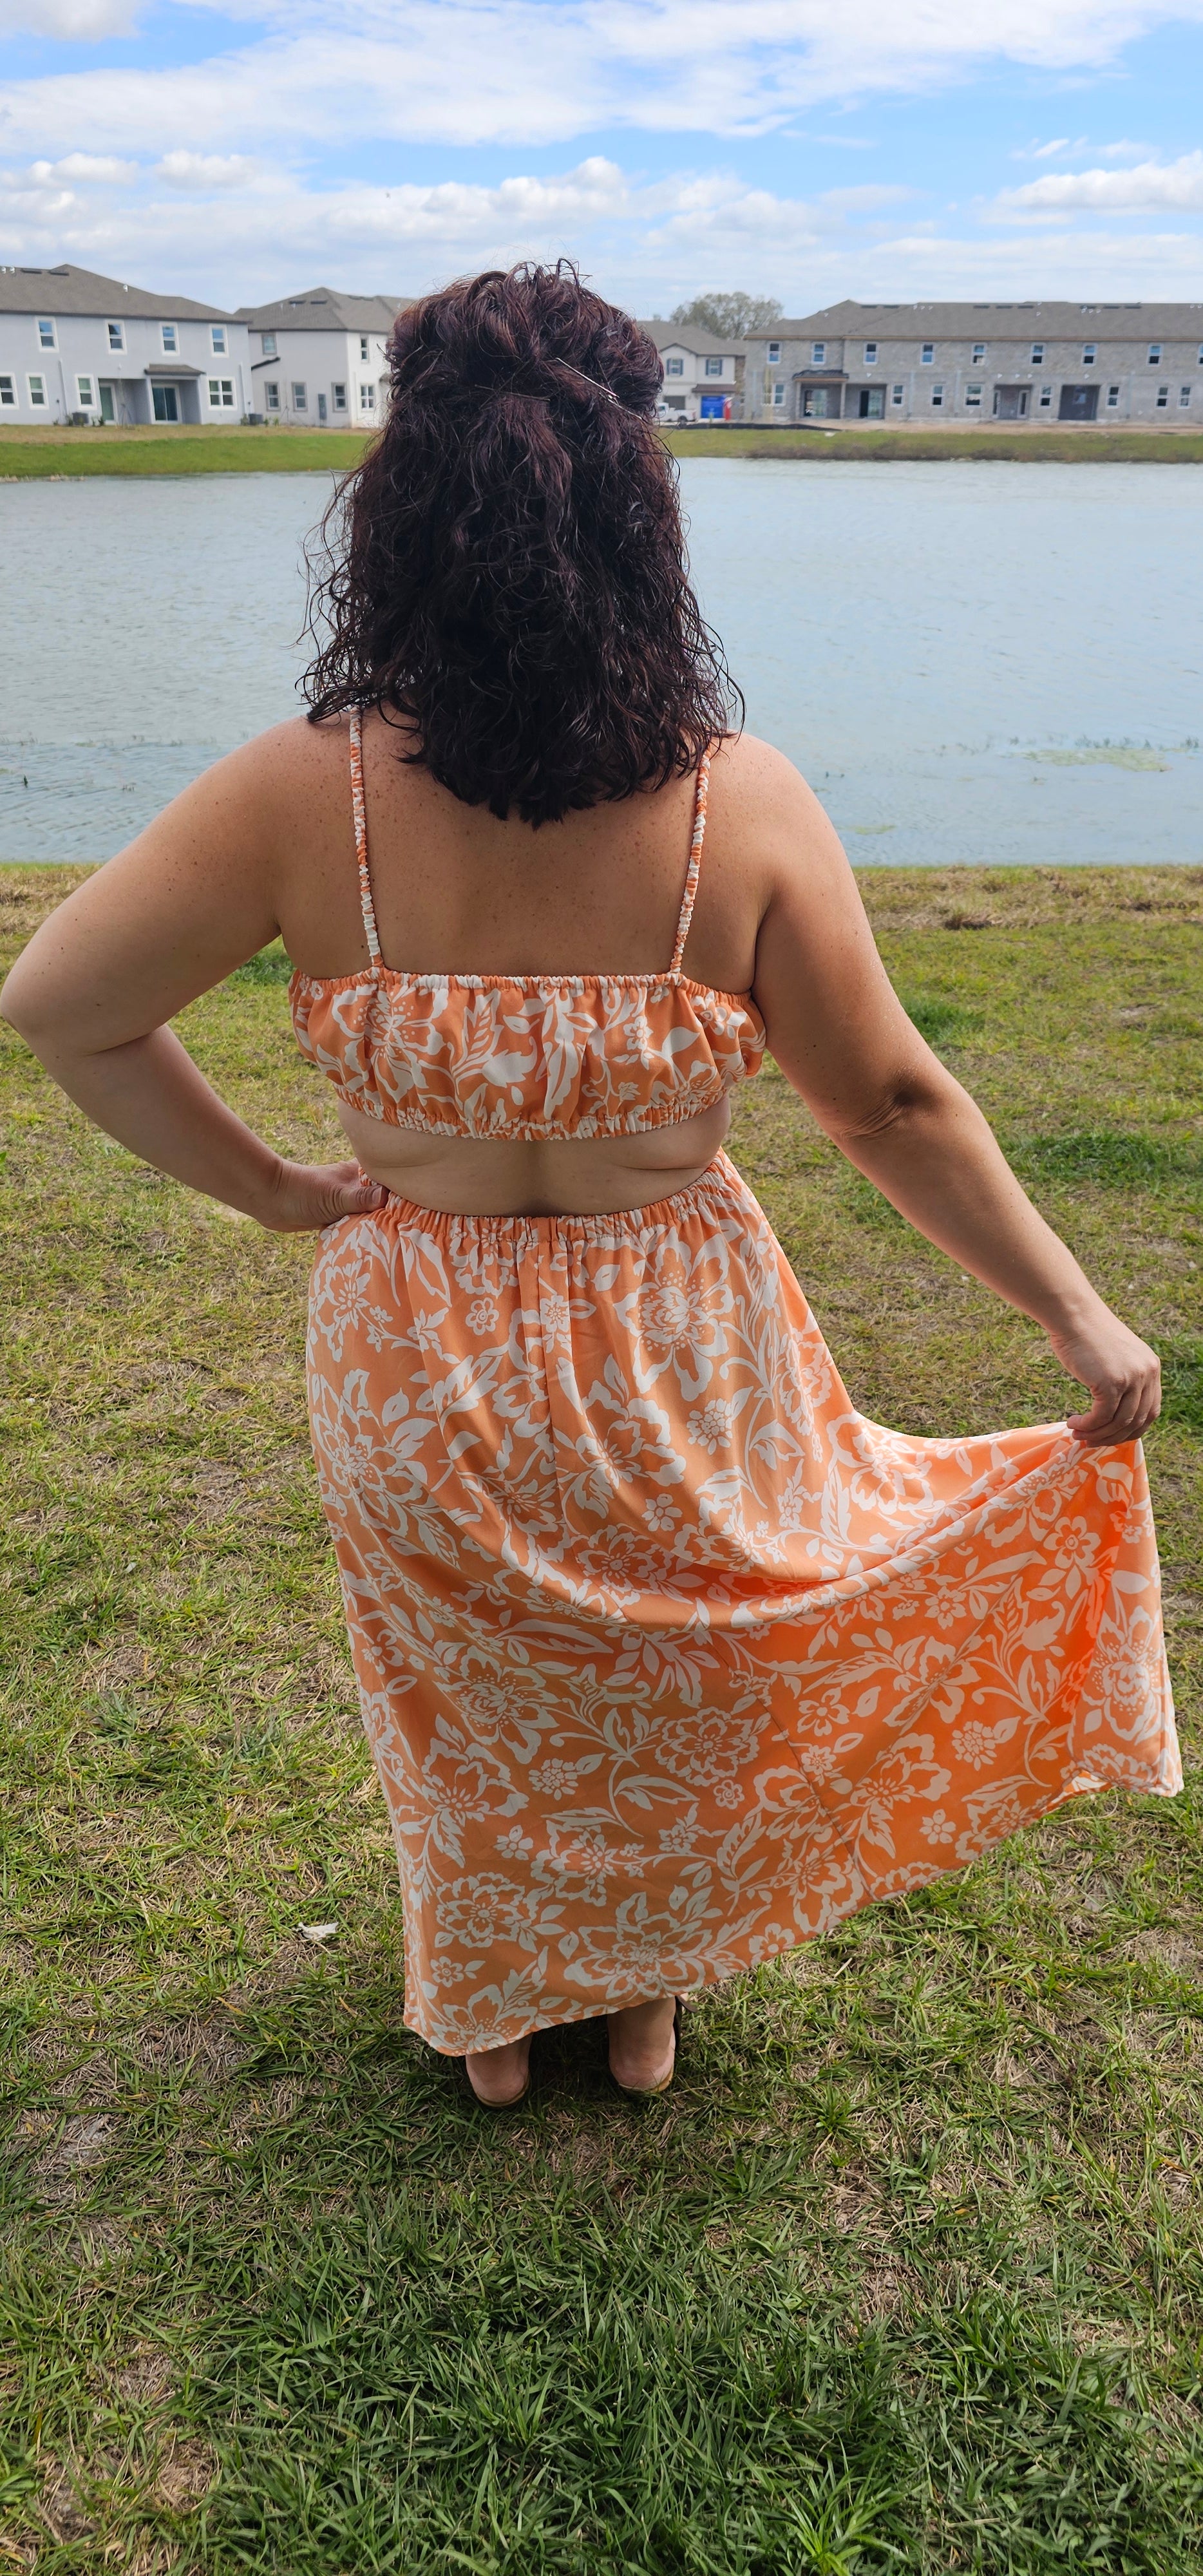 Greet the sunshine in style with the "Out For Lunch" maxi dress. It's got all the features you need for a lunchtime jaunt: square neckline, ruched spaghetti straps, and fun side and back cut-out details. Plus, it's made from lightweight and comfortable materials so you can explore a new lunch spot with ease! Let's get brunchin'! Sizes small through large.